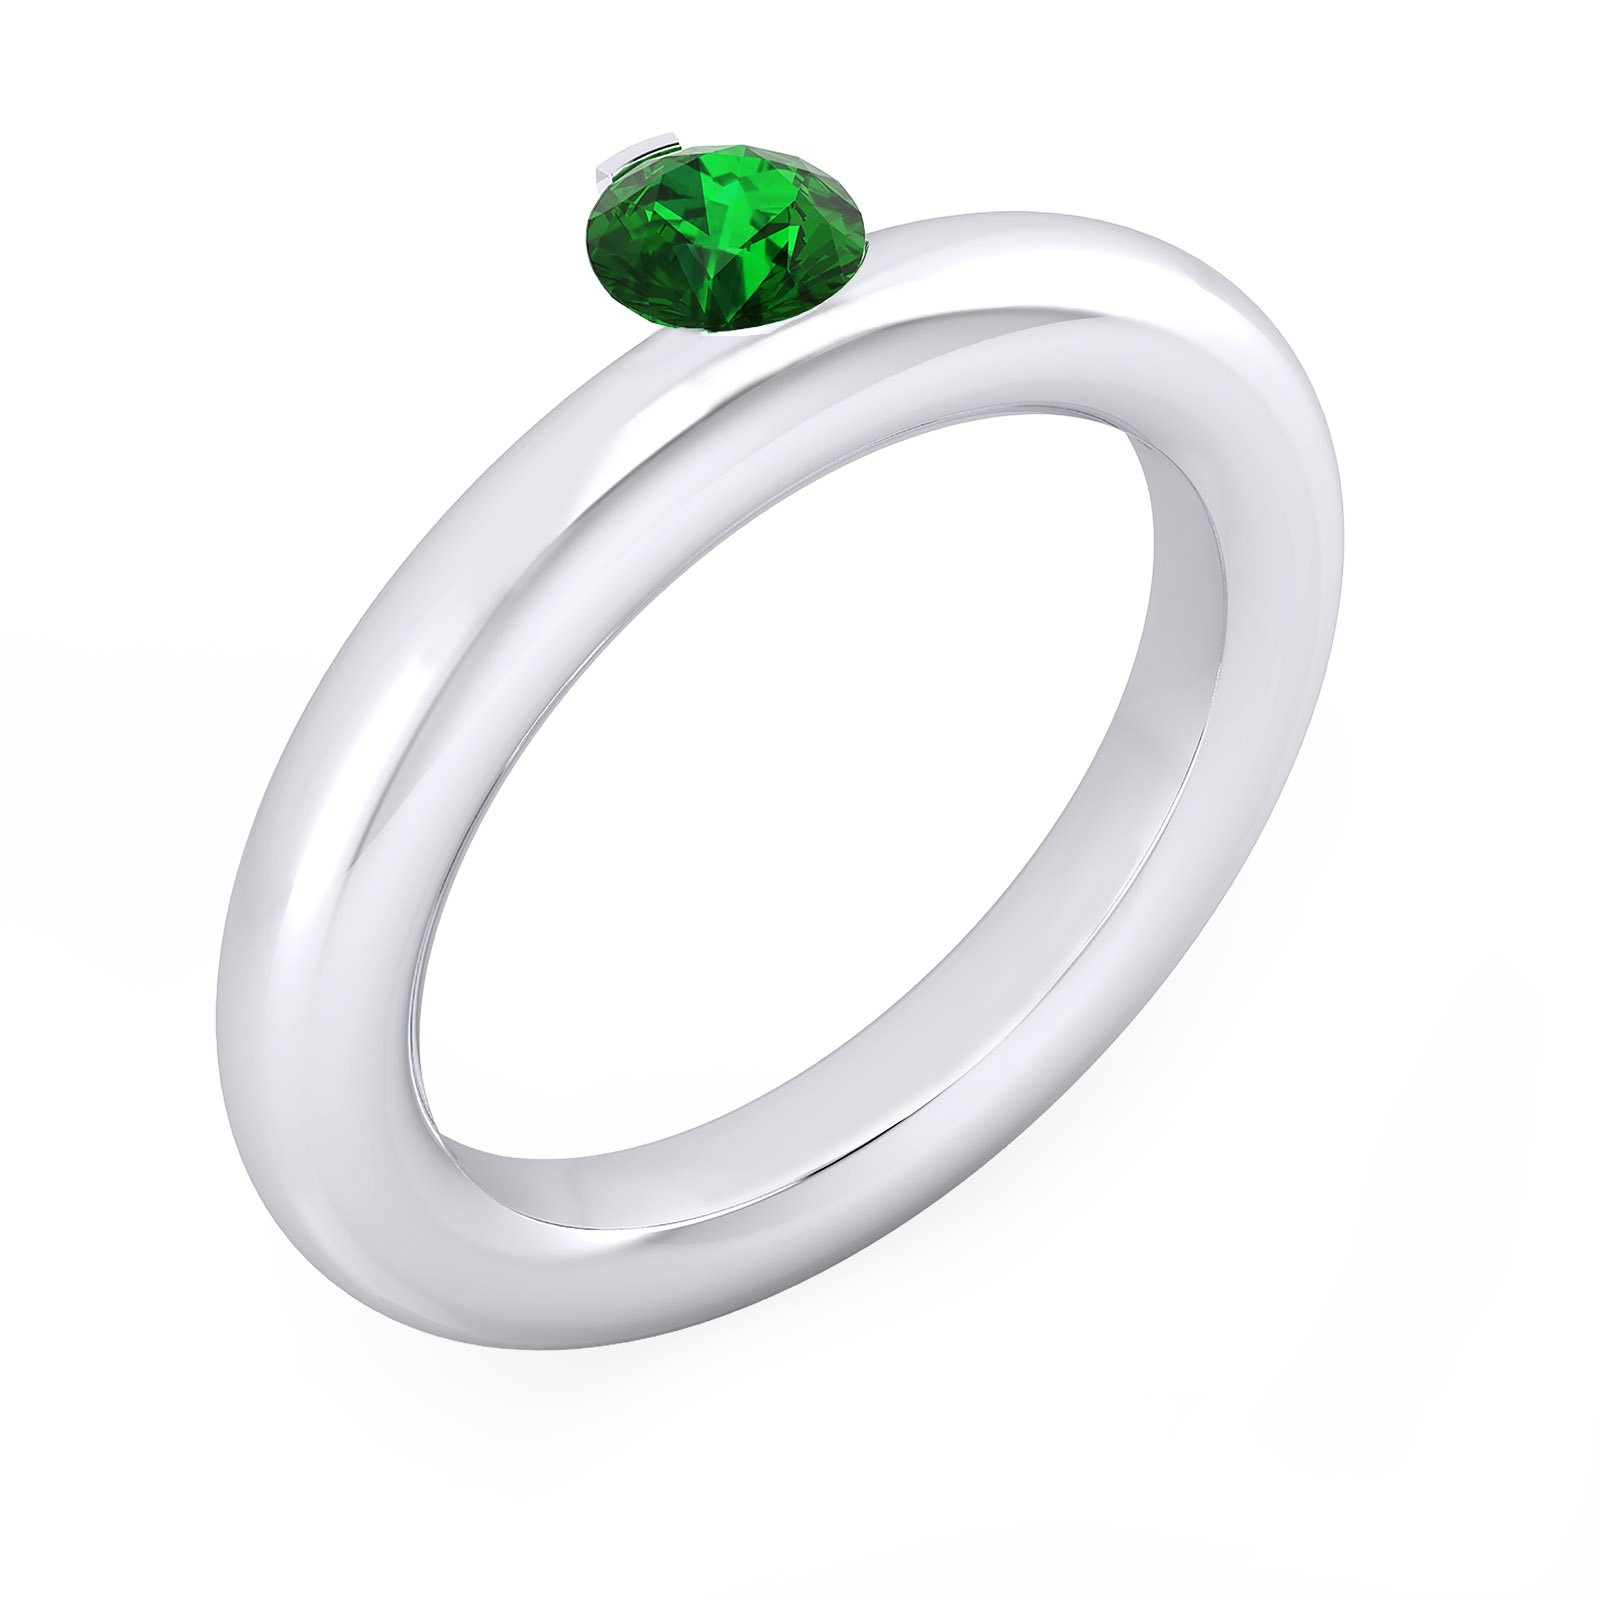 White gold engagement rings natural emerald